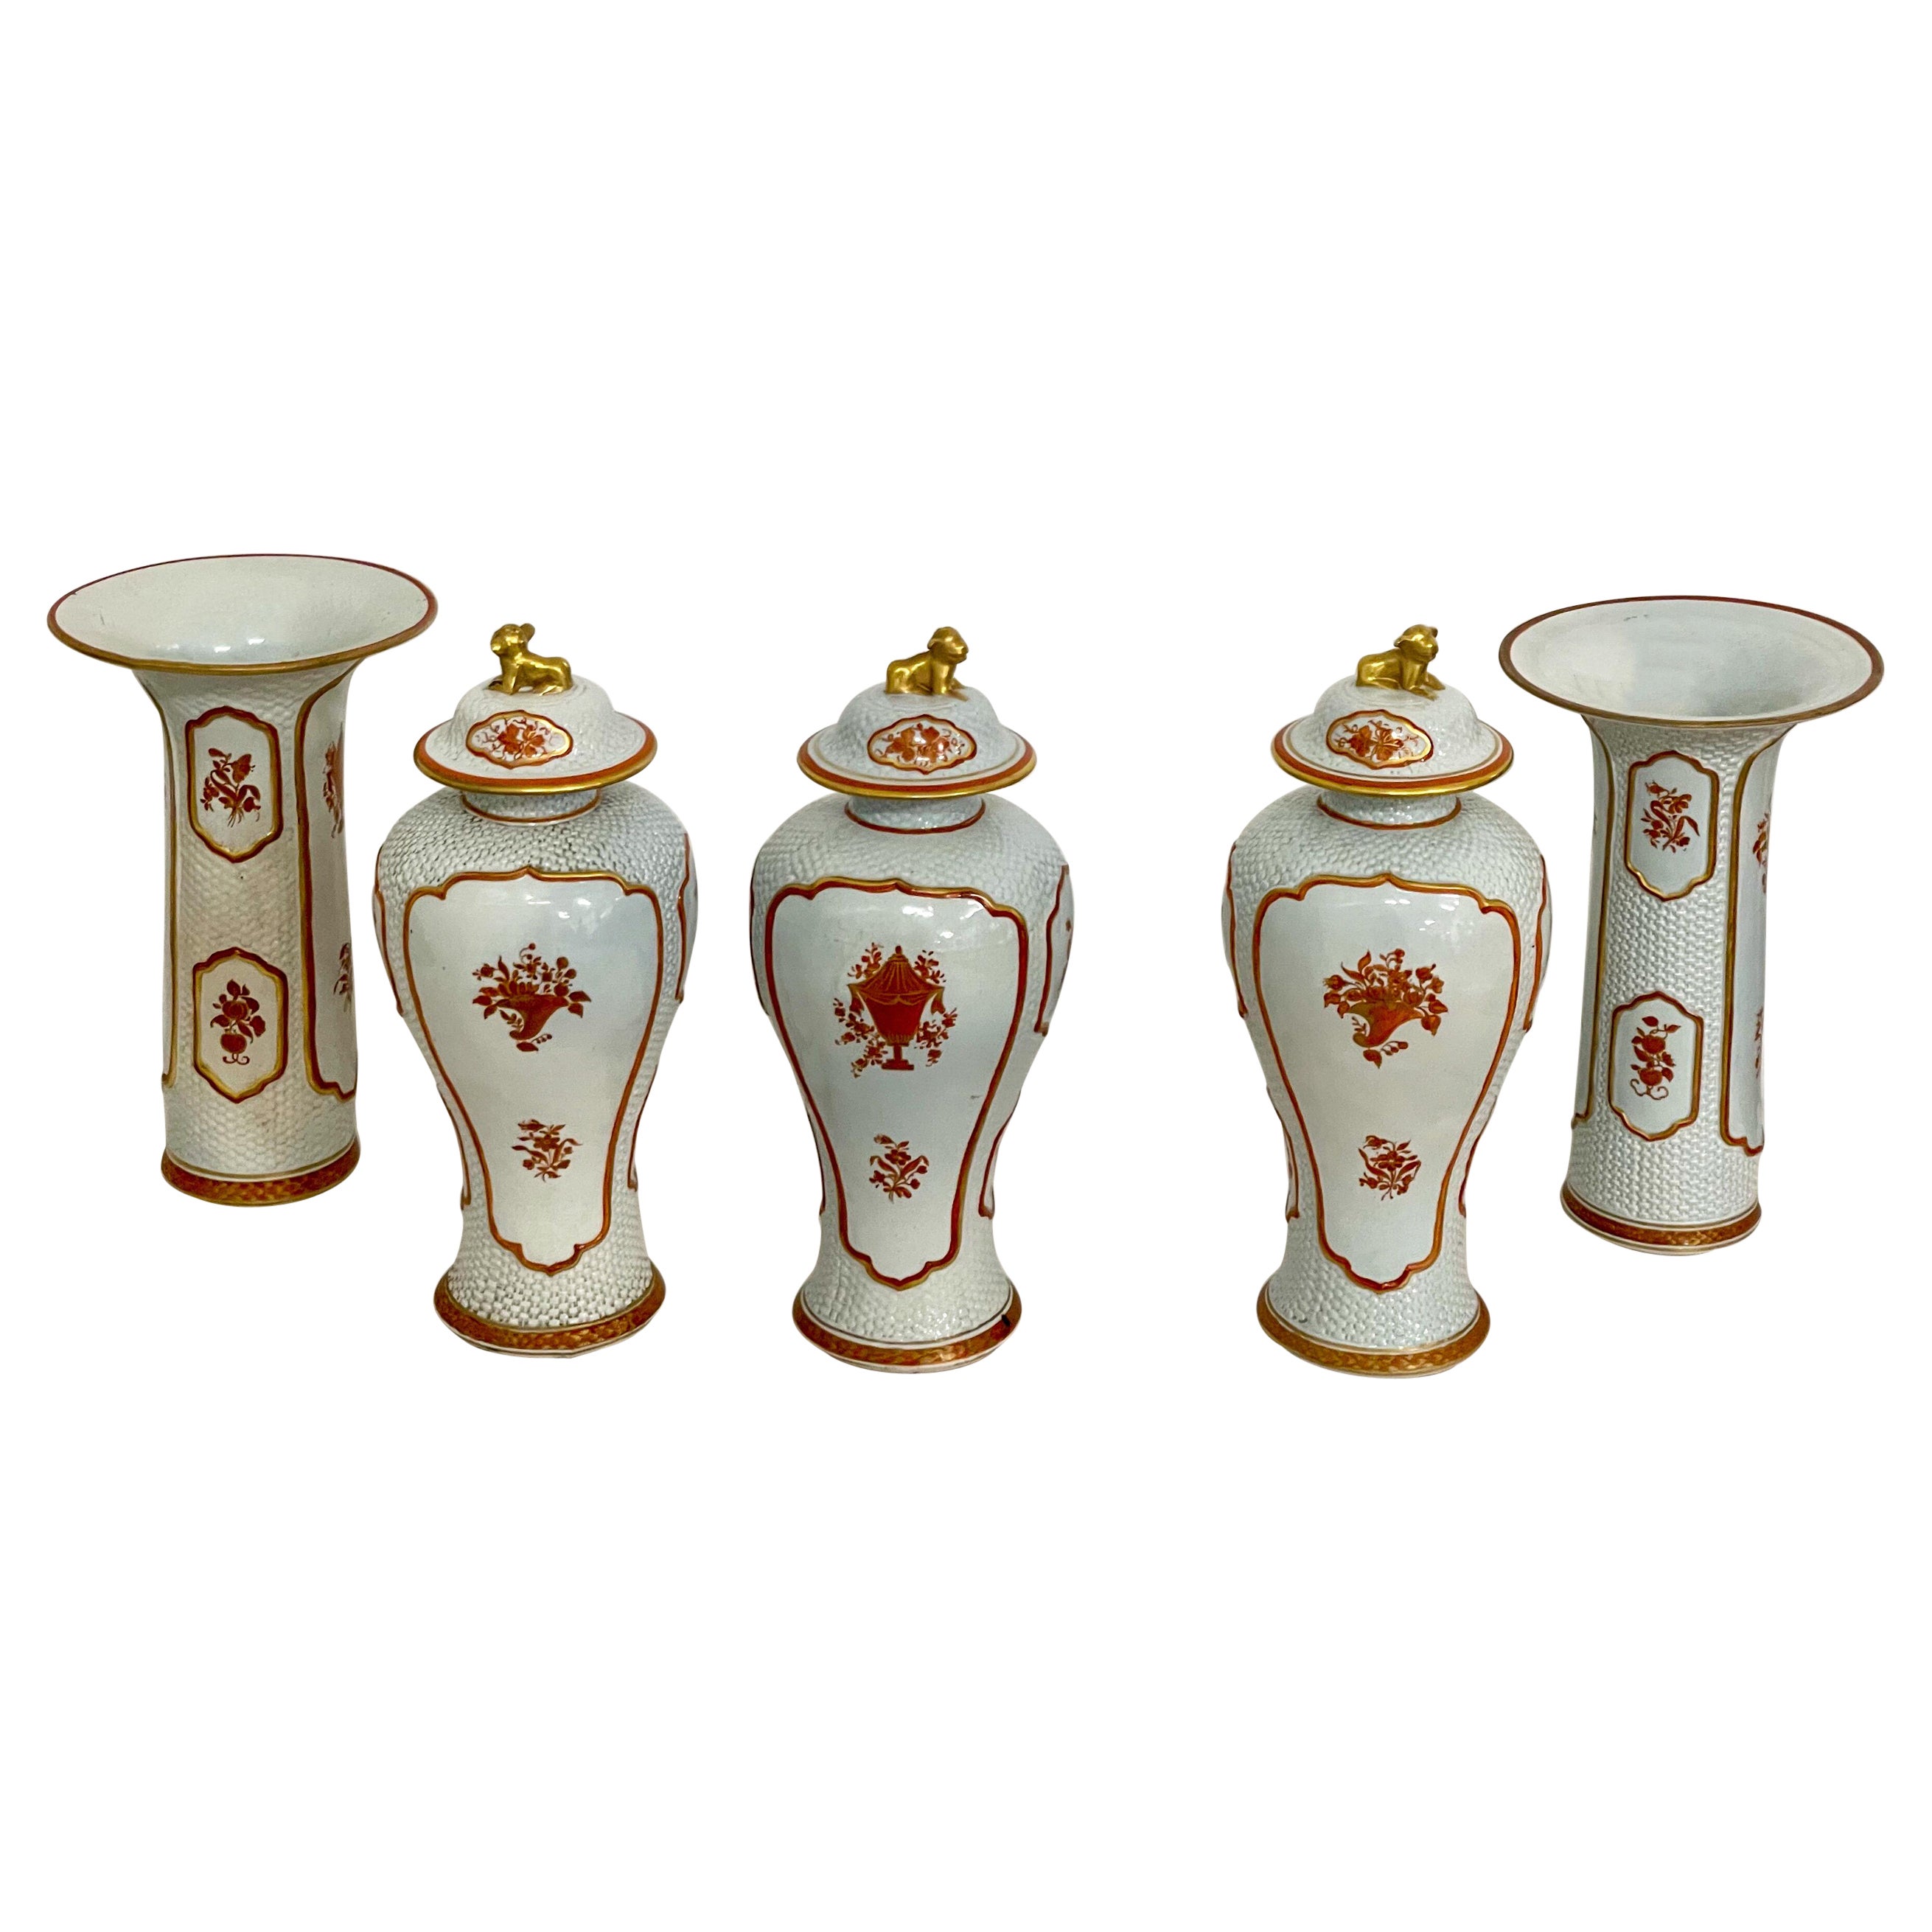 Armorial Garniture Set with Vases and Foo Dog Ginger Jars by Mottahedeh, S/5